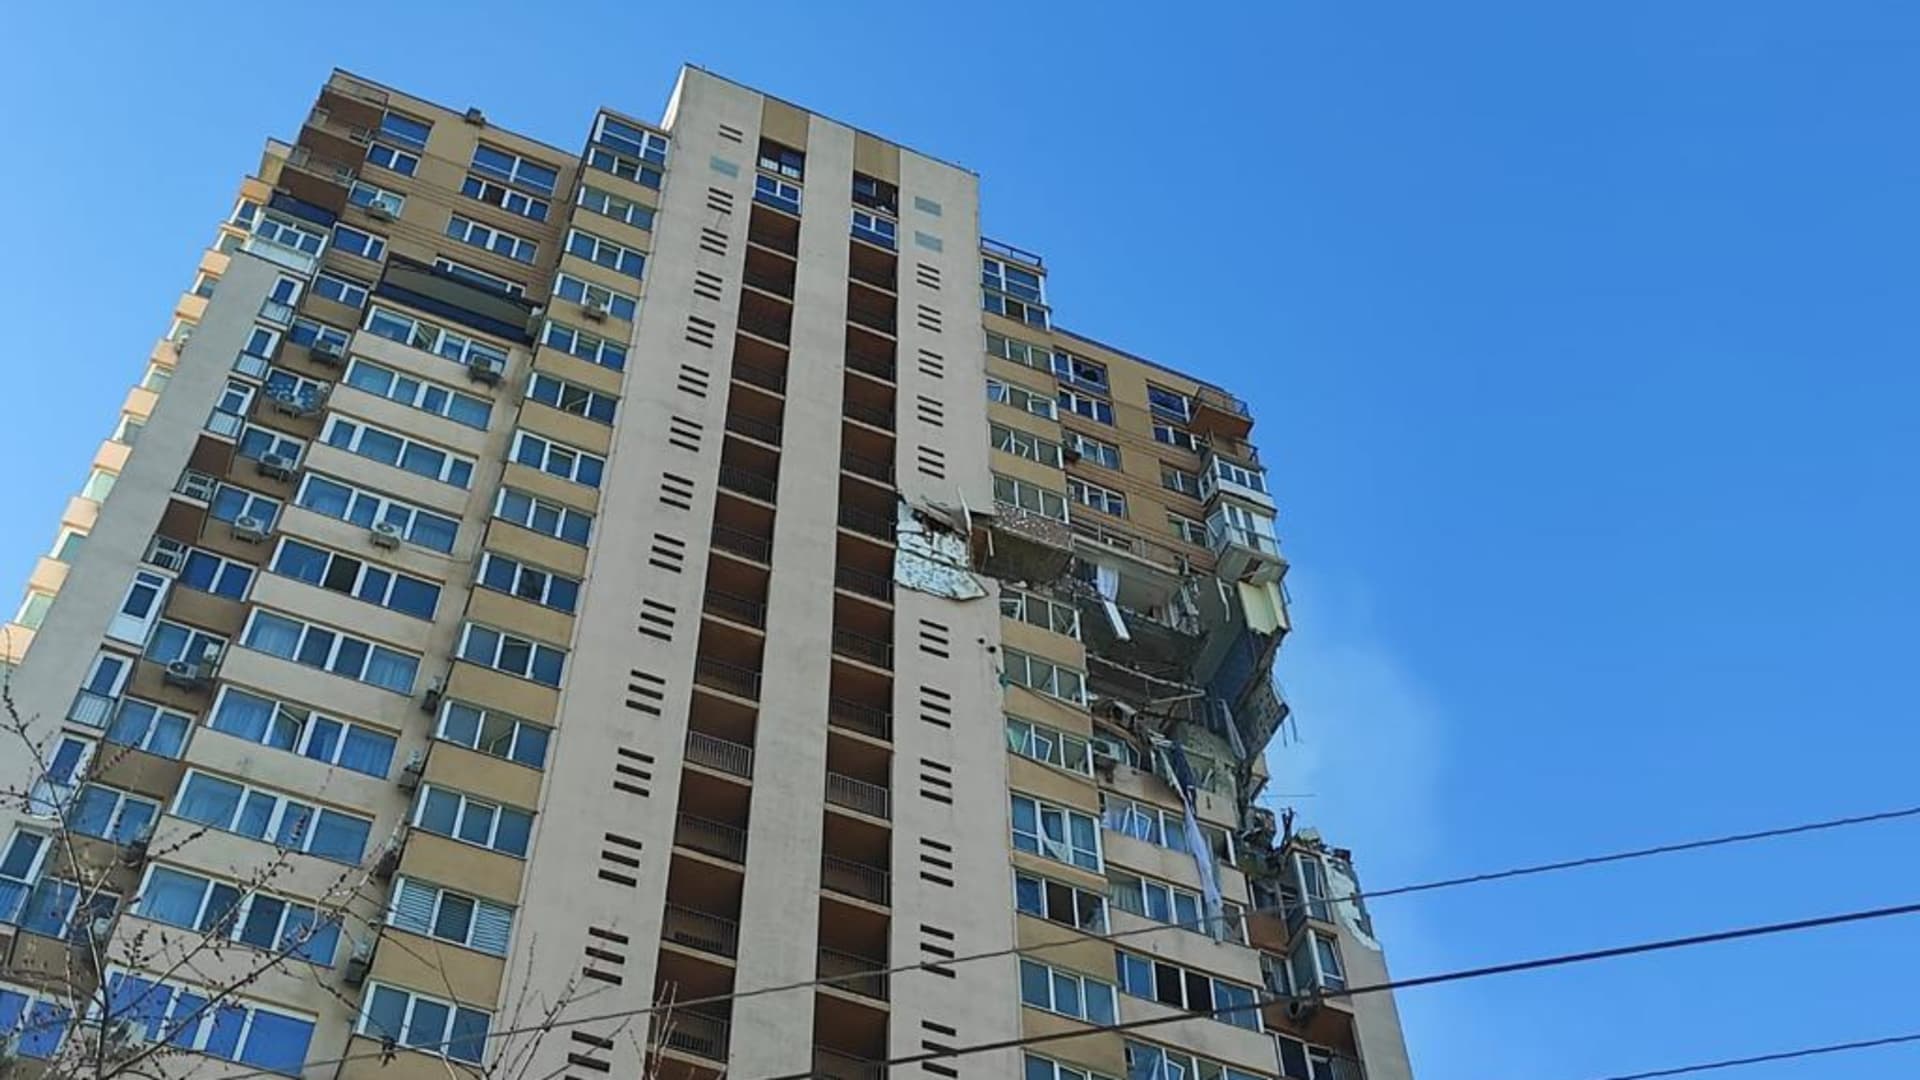 Residential building is seen damaged after an attack on a residential building during Russiaâs military intervention in Kyiv, Ukraine on February 26, 2022.